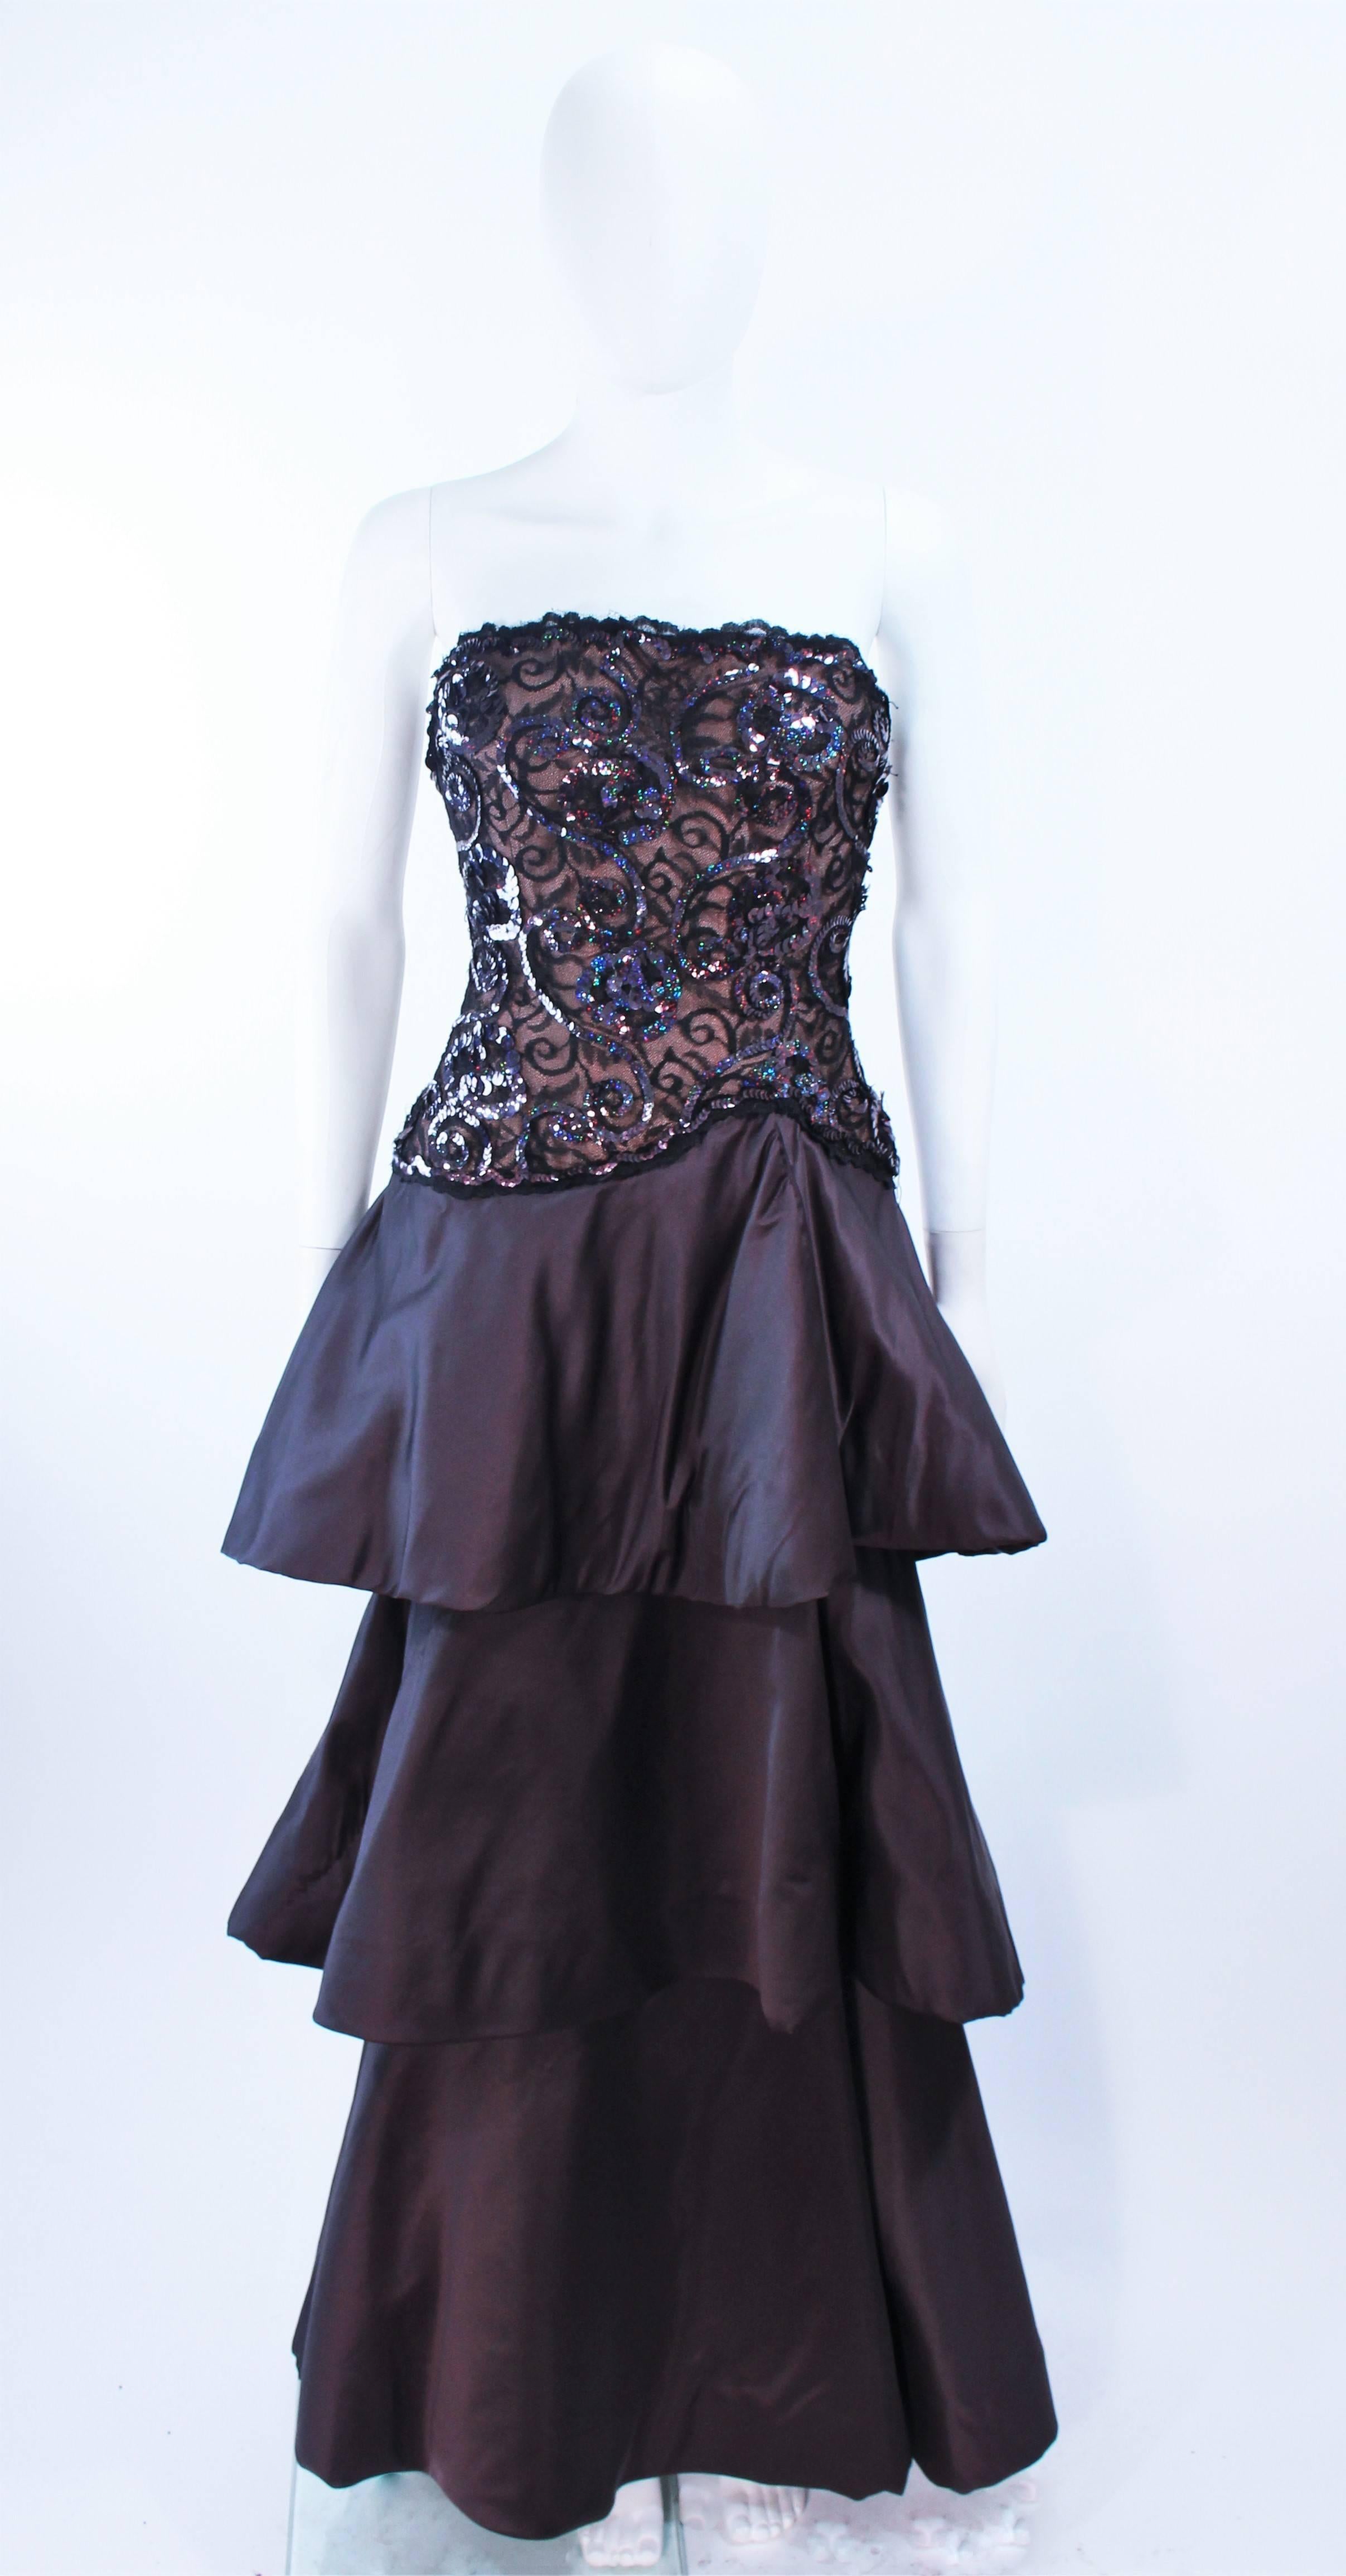 This Scaasi design is composed of black satin. Features a lace bodice with iridescent sequin applique. The tiered style skirt has a horse hair trim. There is an boned interior and a center back zipper closure. In excellent vintage